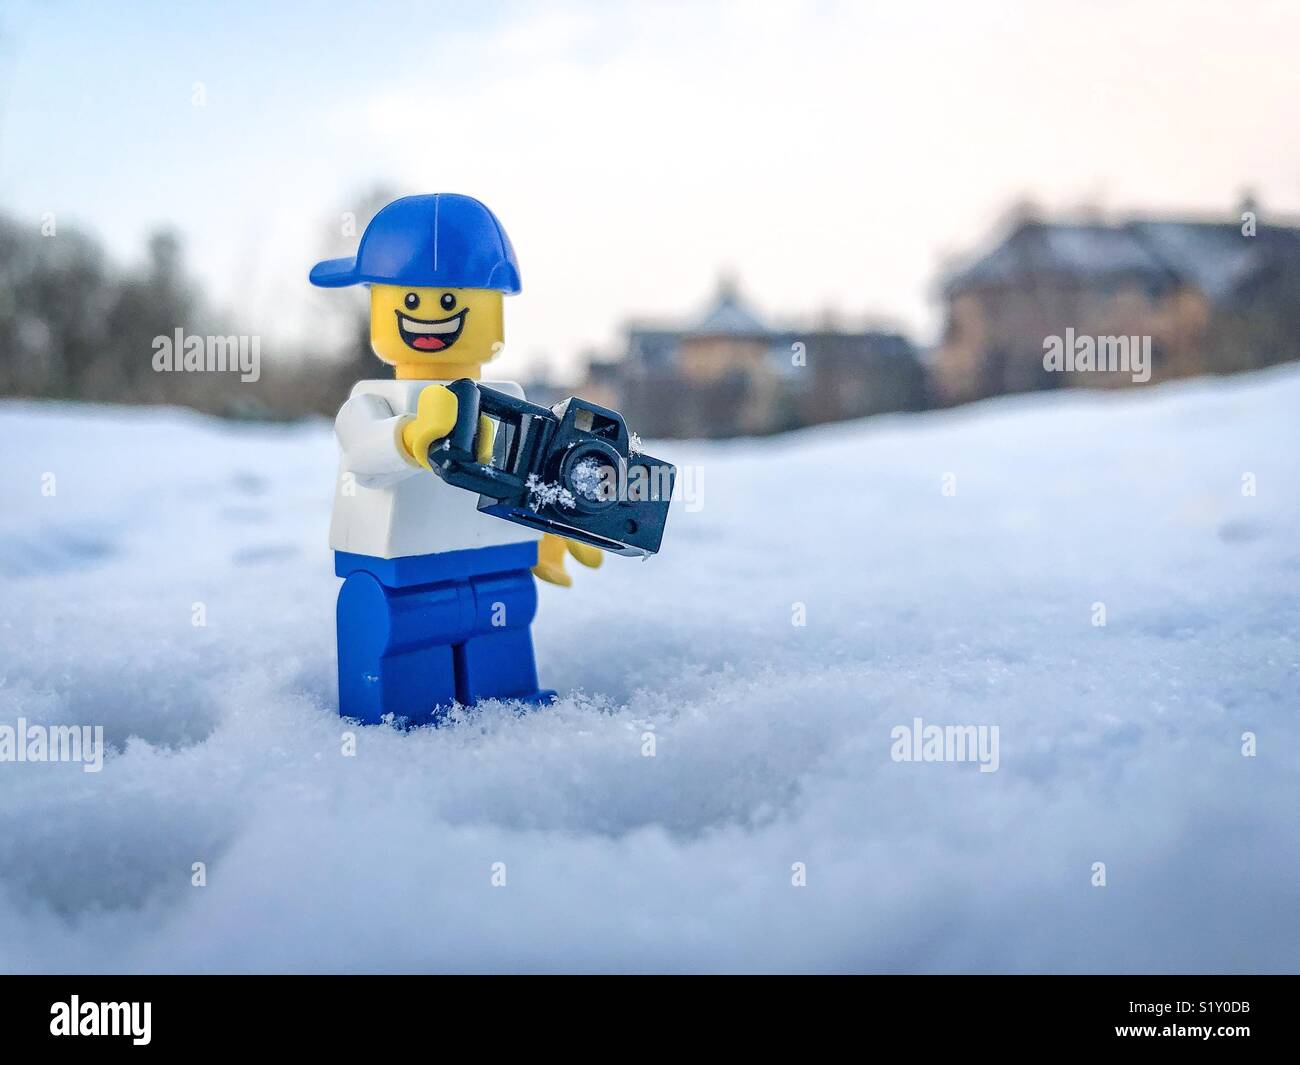 Lego Tog out taking pictures in the snow Stock Photo: 310994359 ...